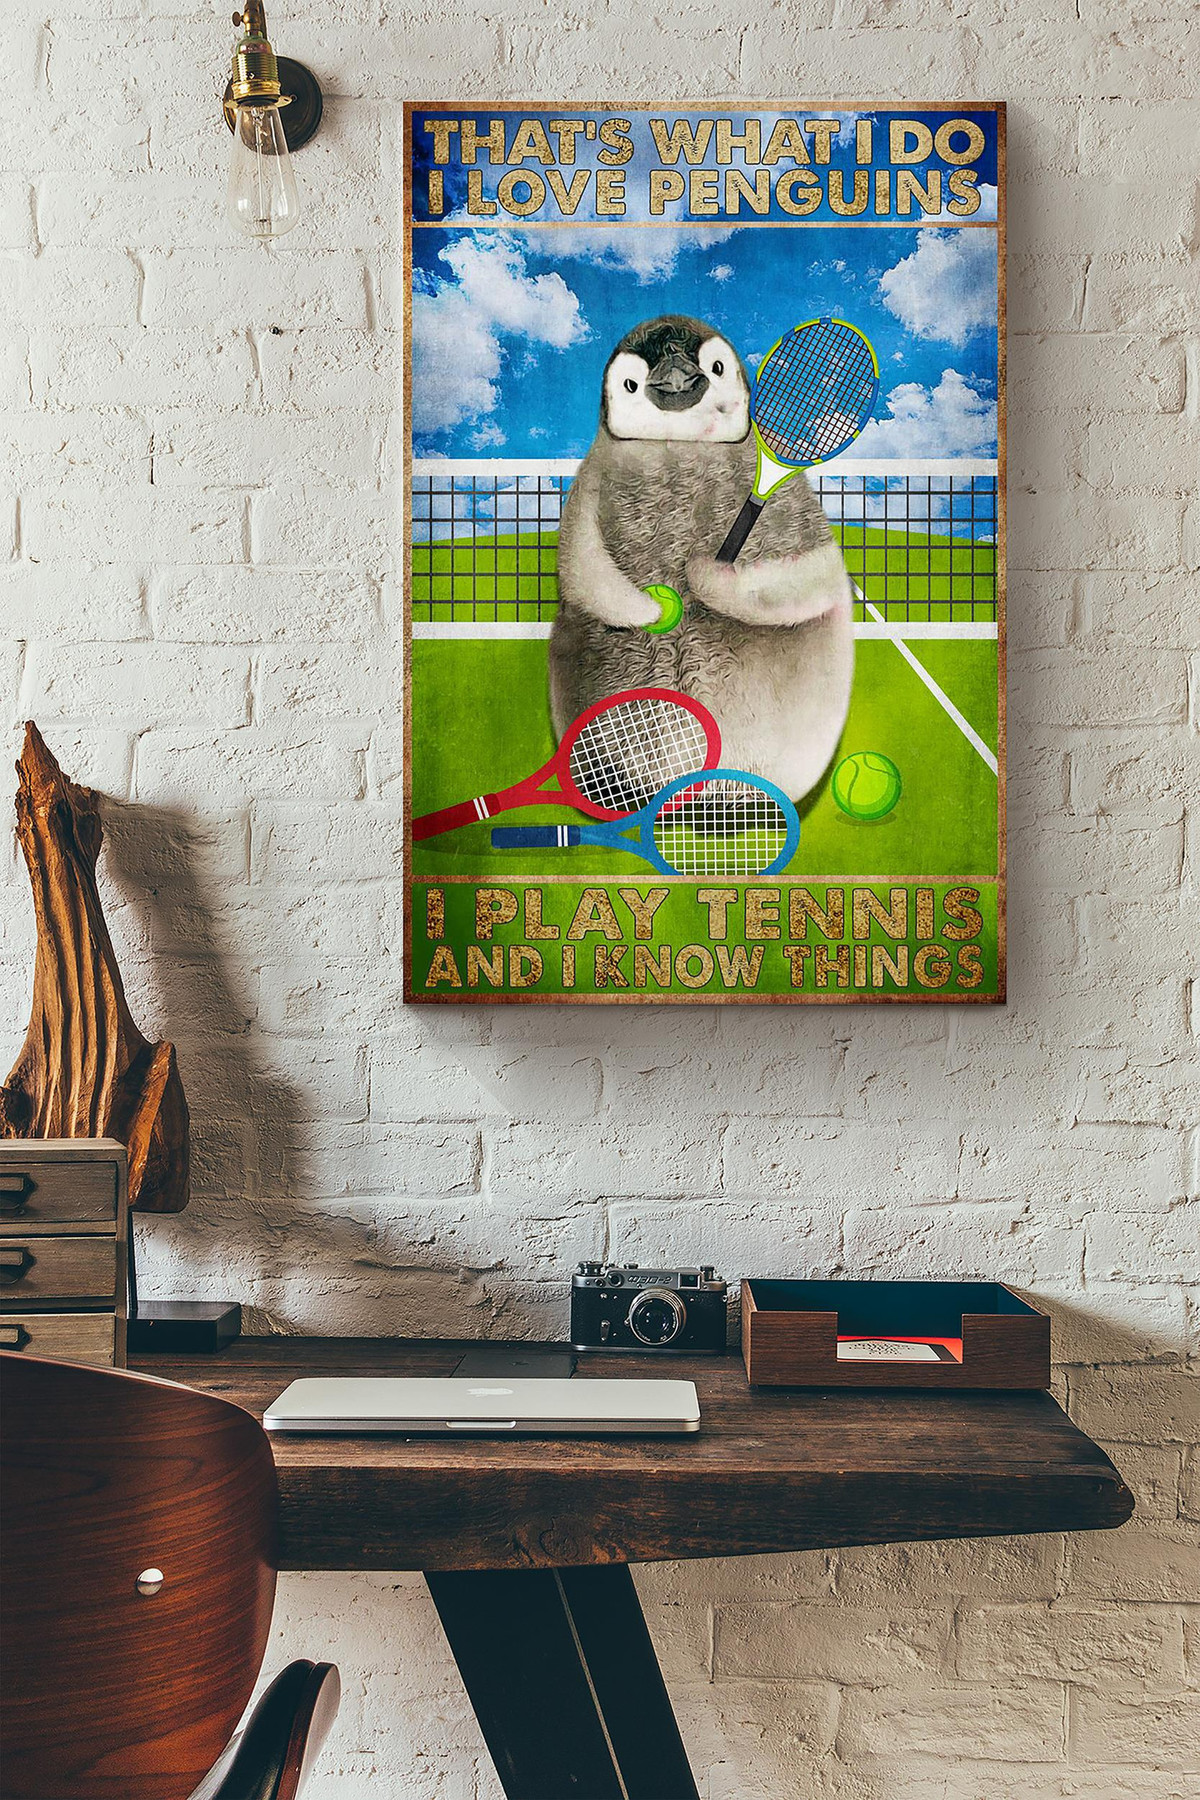 Thats What I Do Love Penguins I Play Tennis And I Know Things Penguins Playing Tennis Canvas Painting Ideas, Canvas Hanging Prints, Gift Idea Framed Prints, Canvas Paintings Wrapped Canvas 8x10